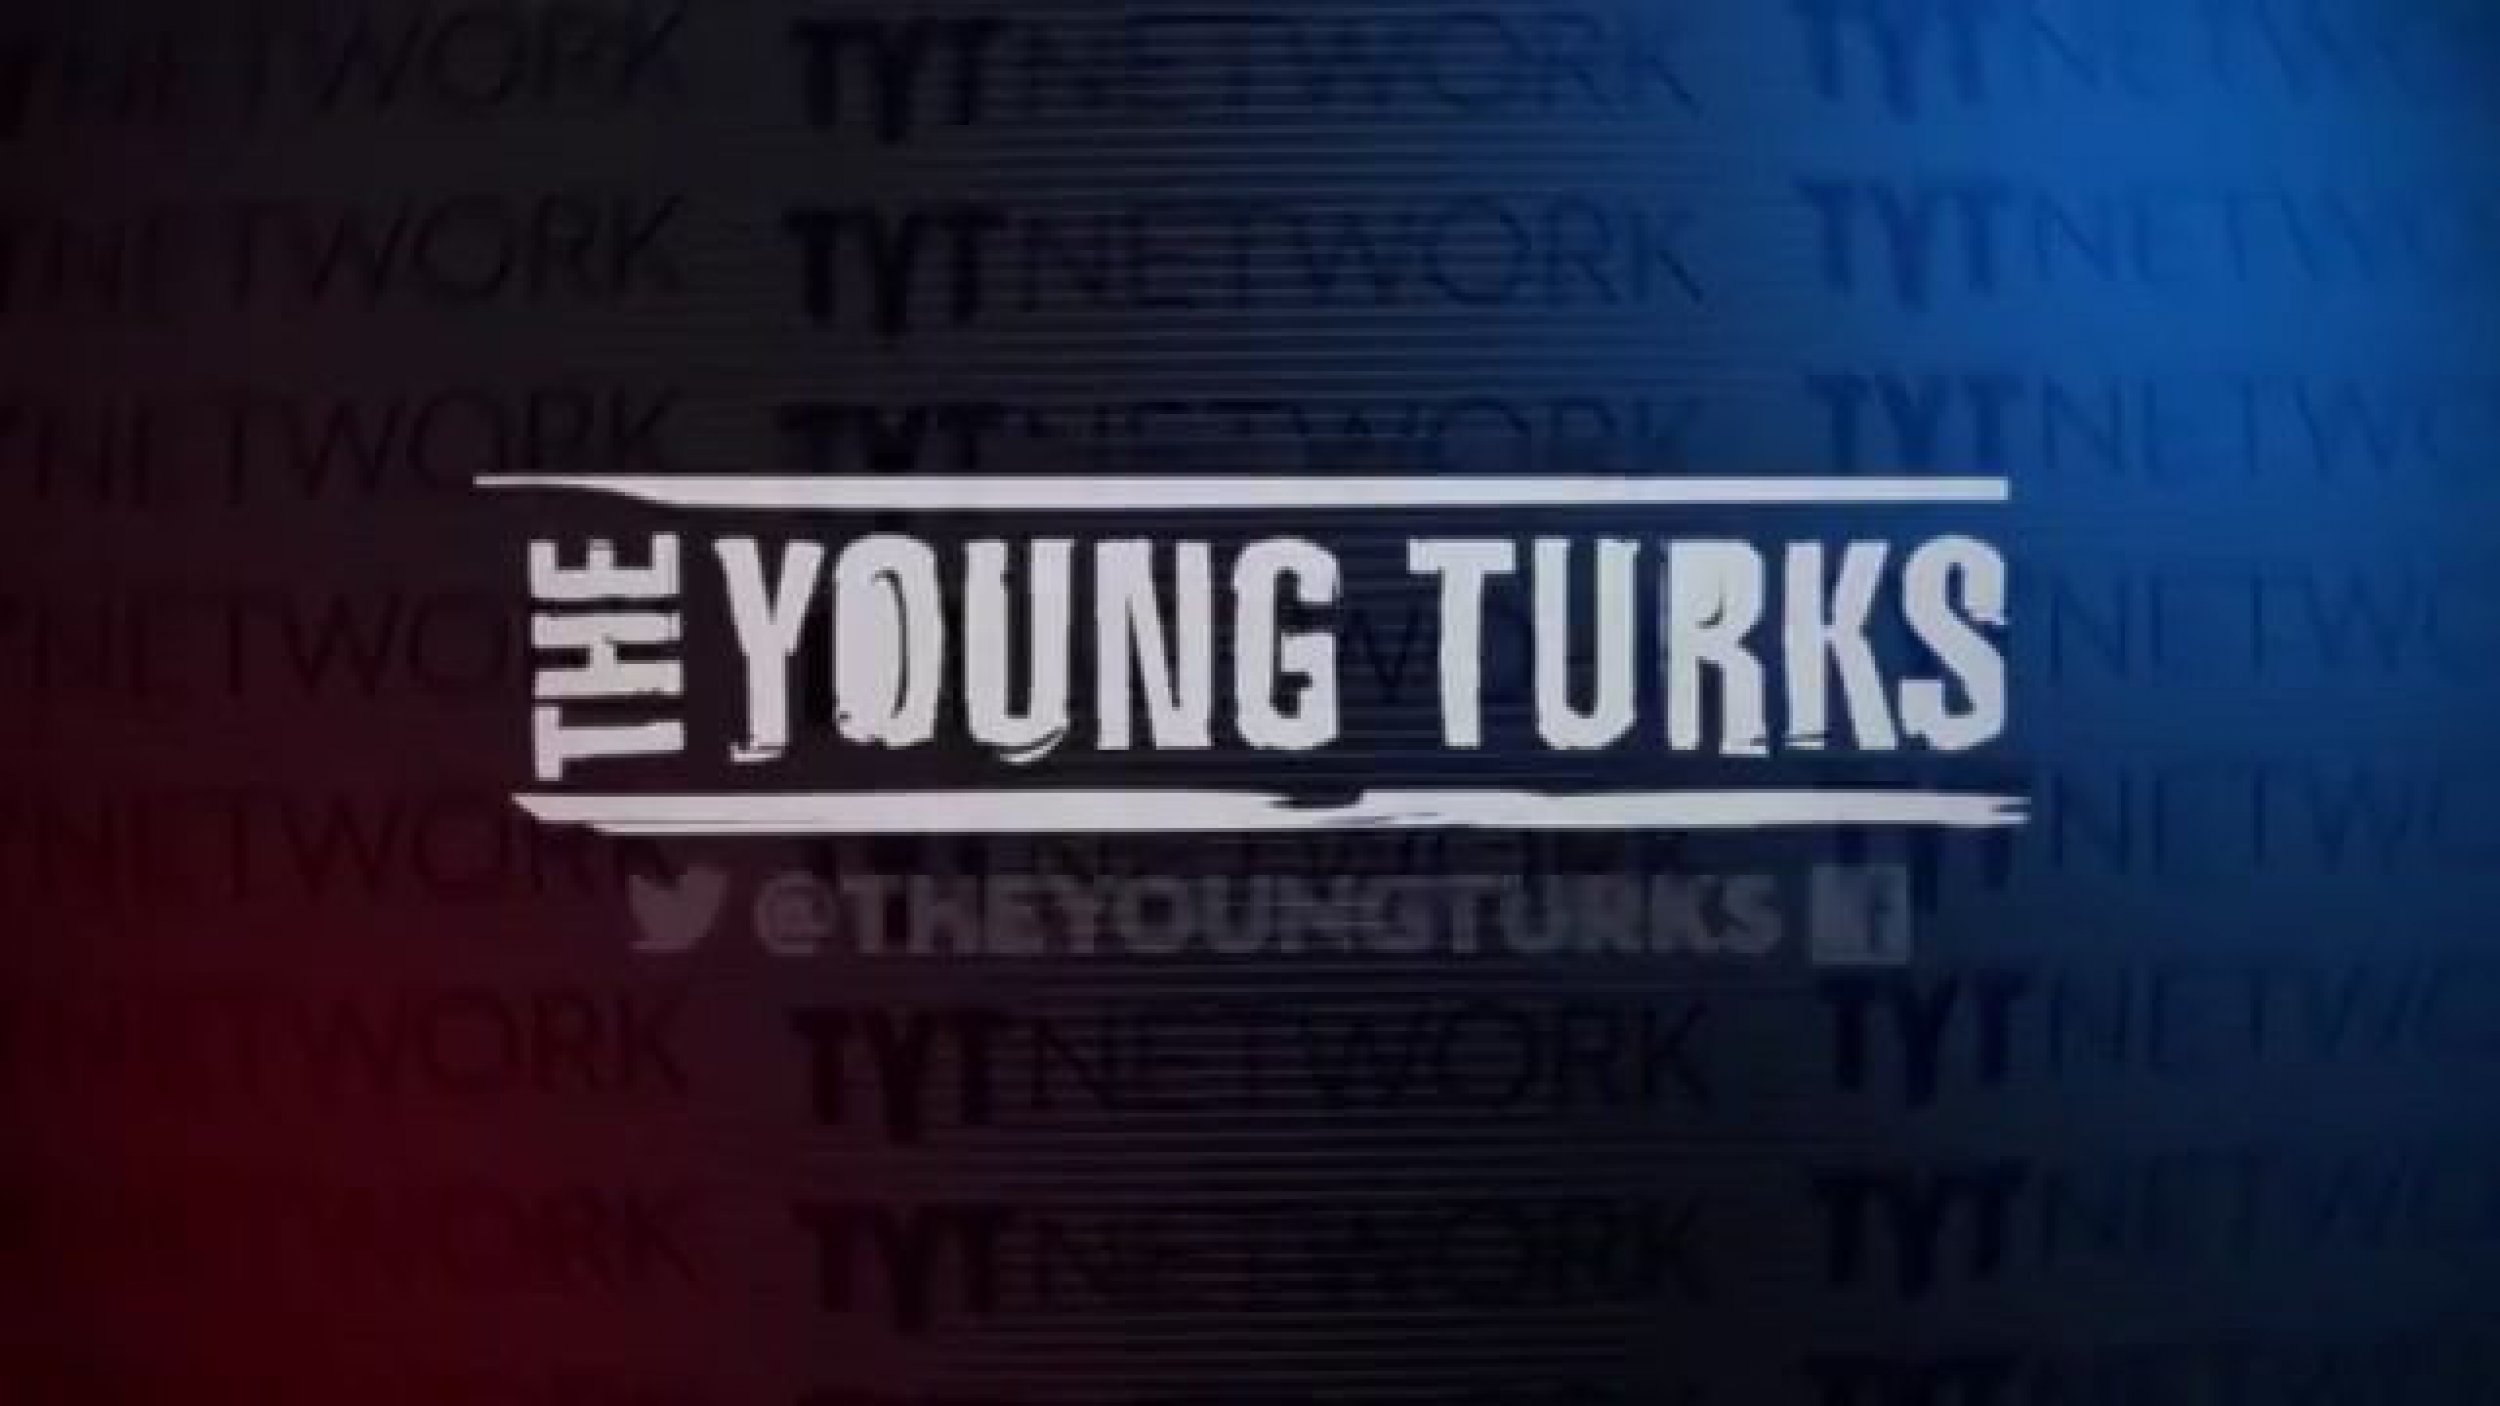 How Cenk Uygur And The Young Turks Have Cracked The Code For Doing News On YouTube